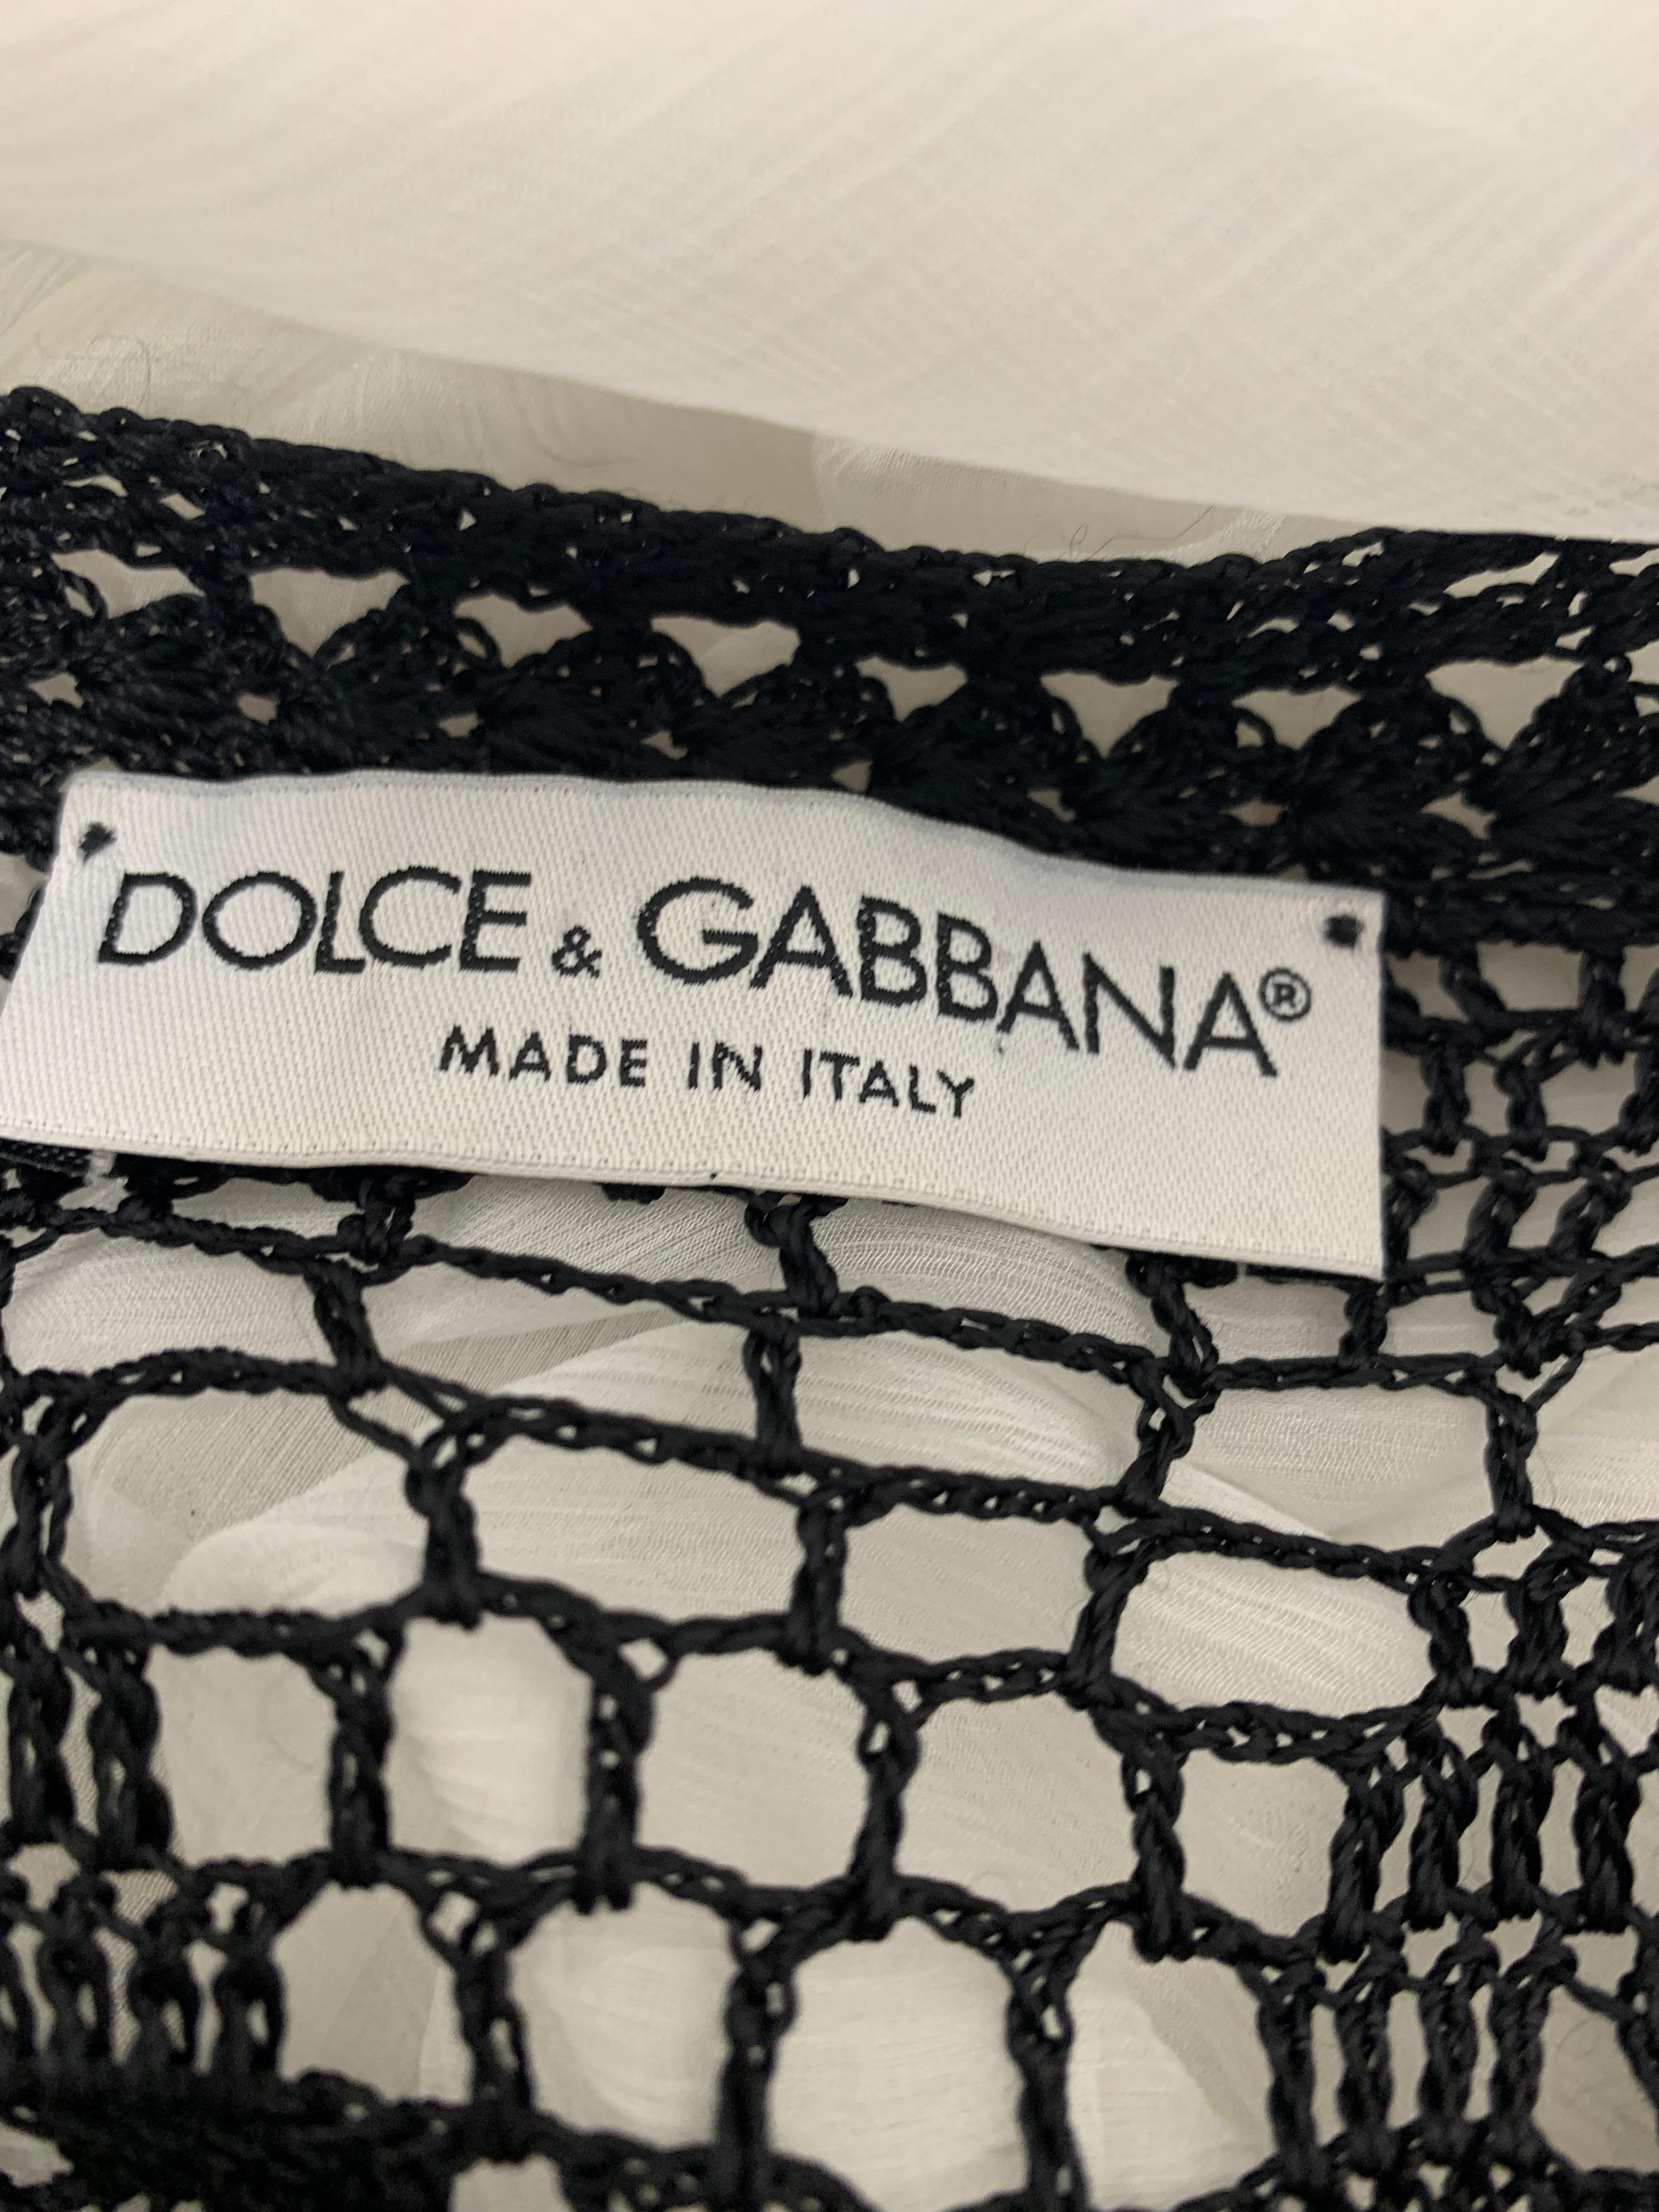 Dolce Gabbana 1997 black crochet knitted mini  dress
See through 
Great vintage condition 
Size label is missing. Fits like XS-S